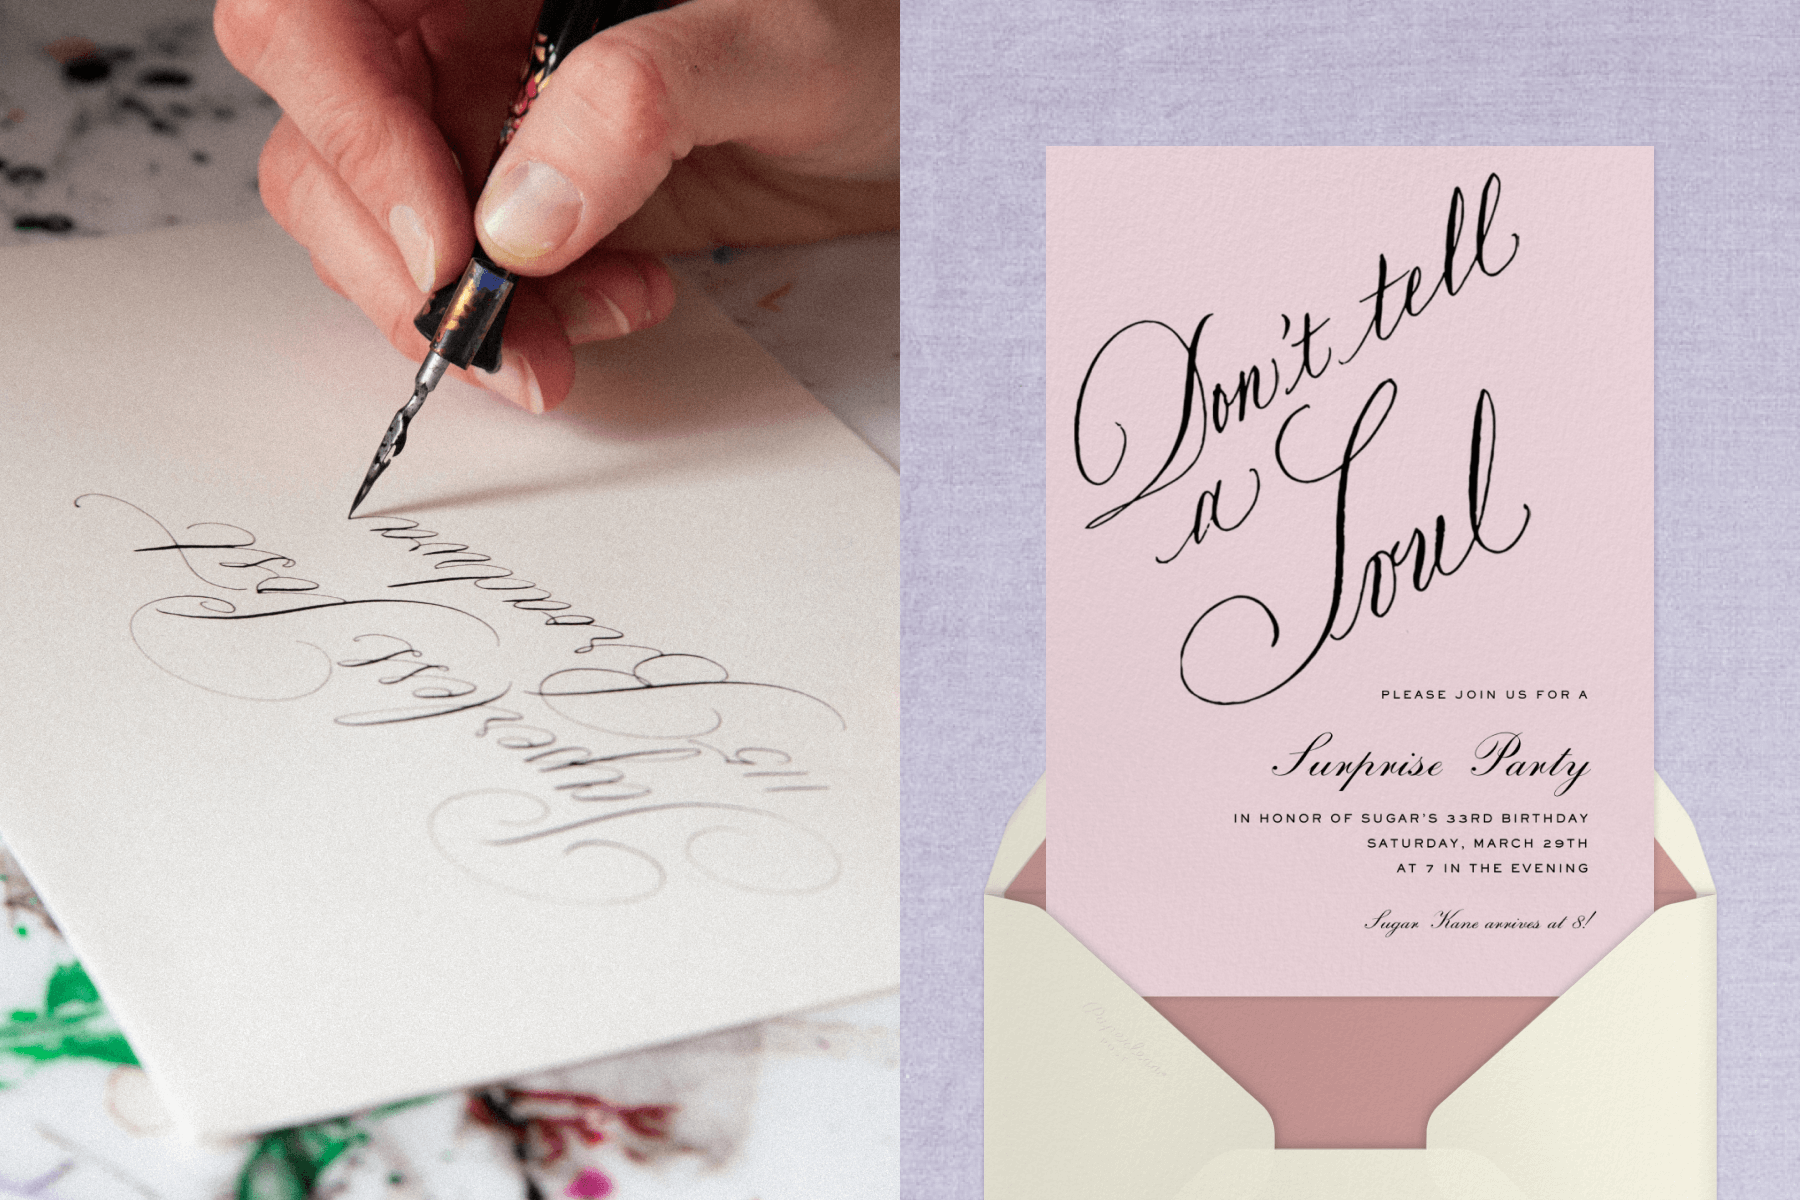 Left: A close up of Stephanie Fishwick’s hand writing calligraphy on a piece of paper; Right: A surprise birthday invitation with calligraphy that reads “Don’t tell a soul.”